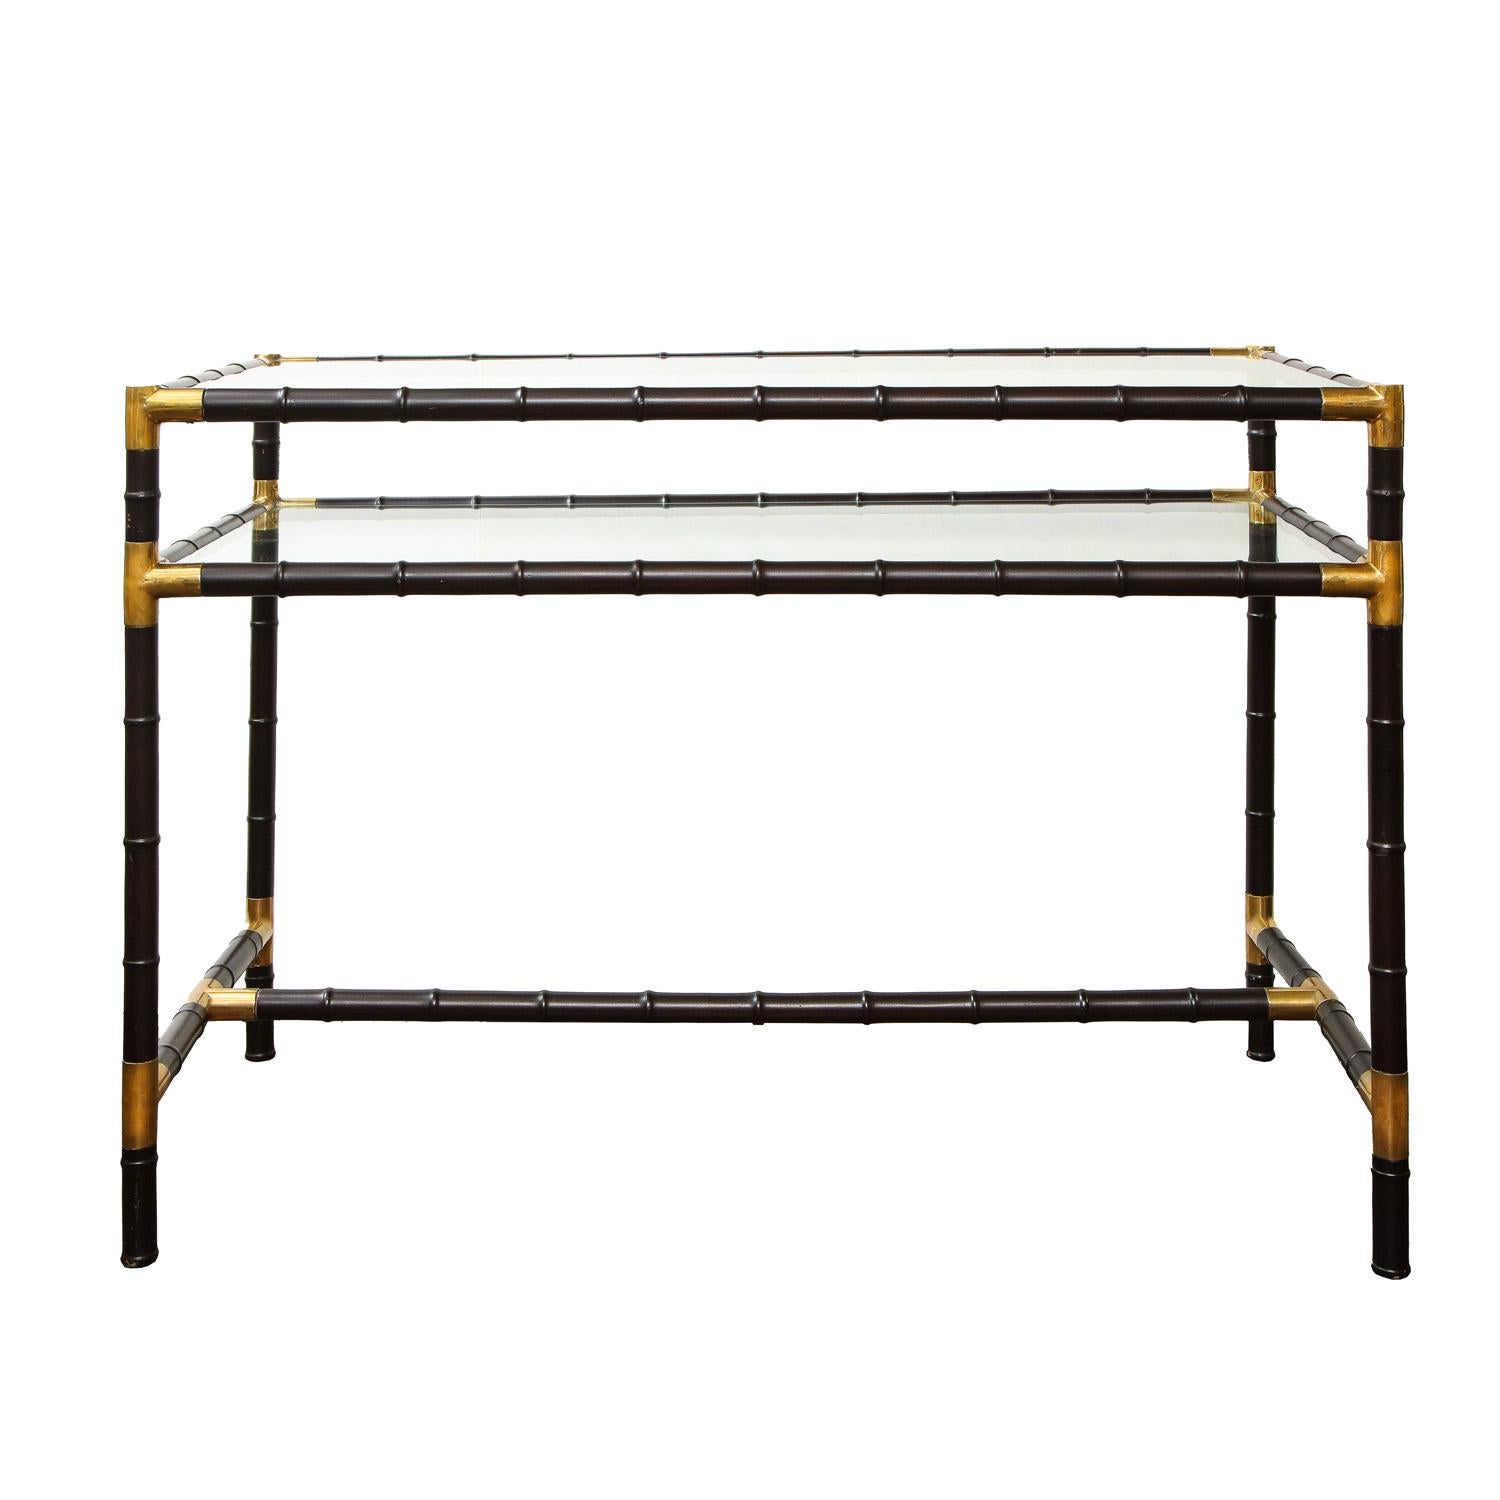 Rare and elegant faux bamboo table in steel and glass with brass accents by Billy Haines, American 1970.

The table has beautiful lines and an impressive understated aesthetic. The size, shape and scale make it a perfect console or entry table.